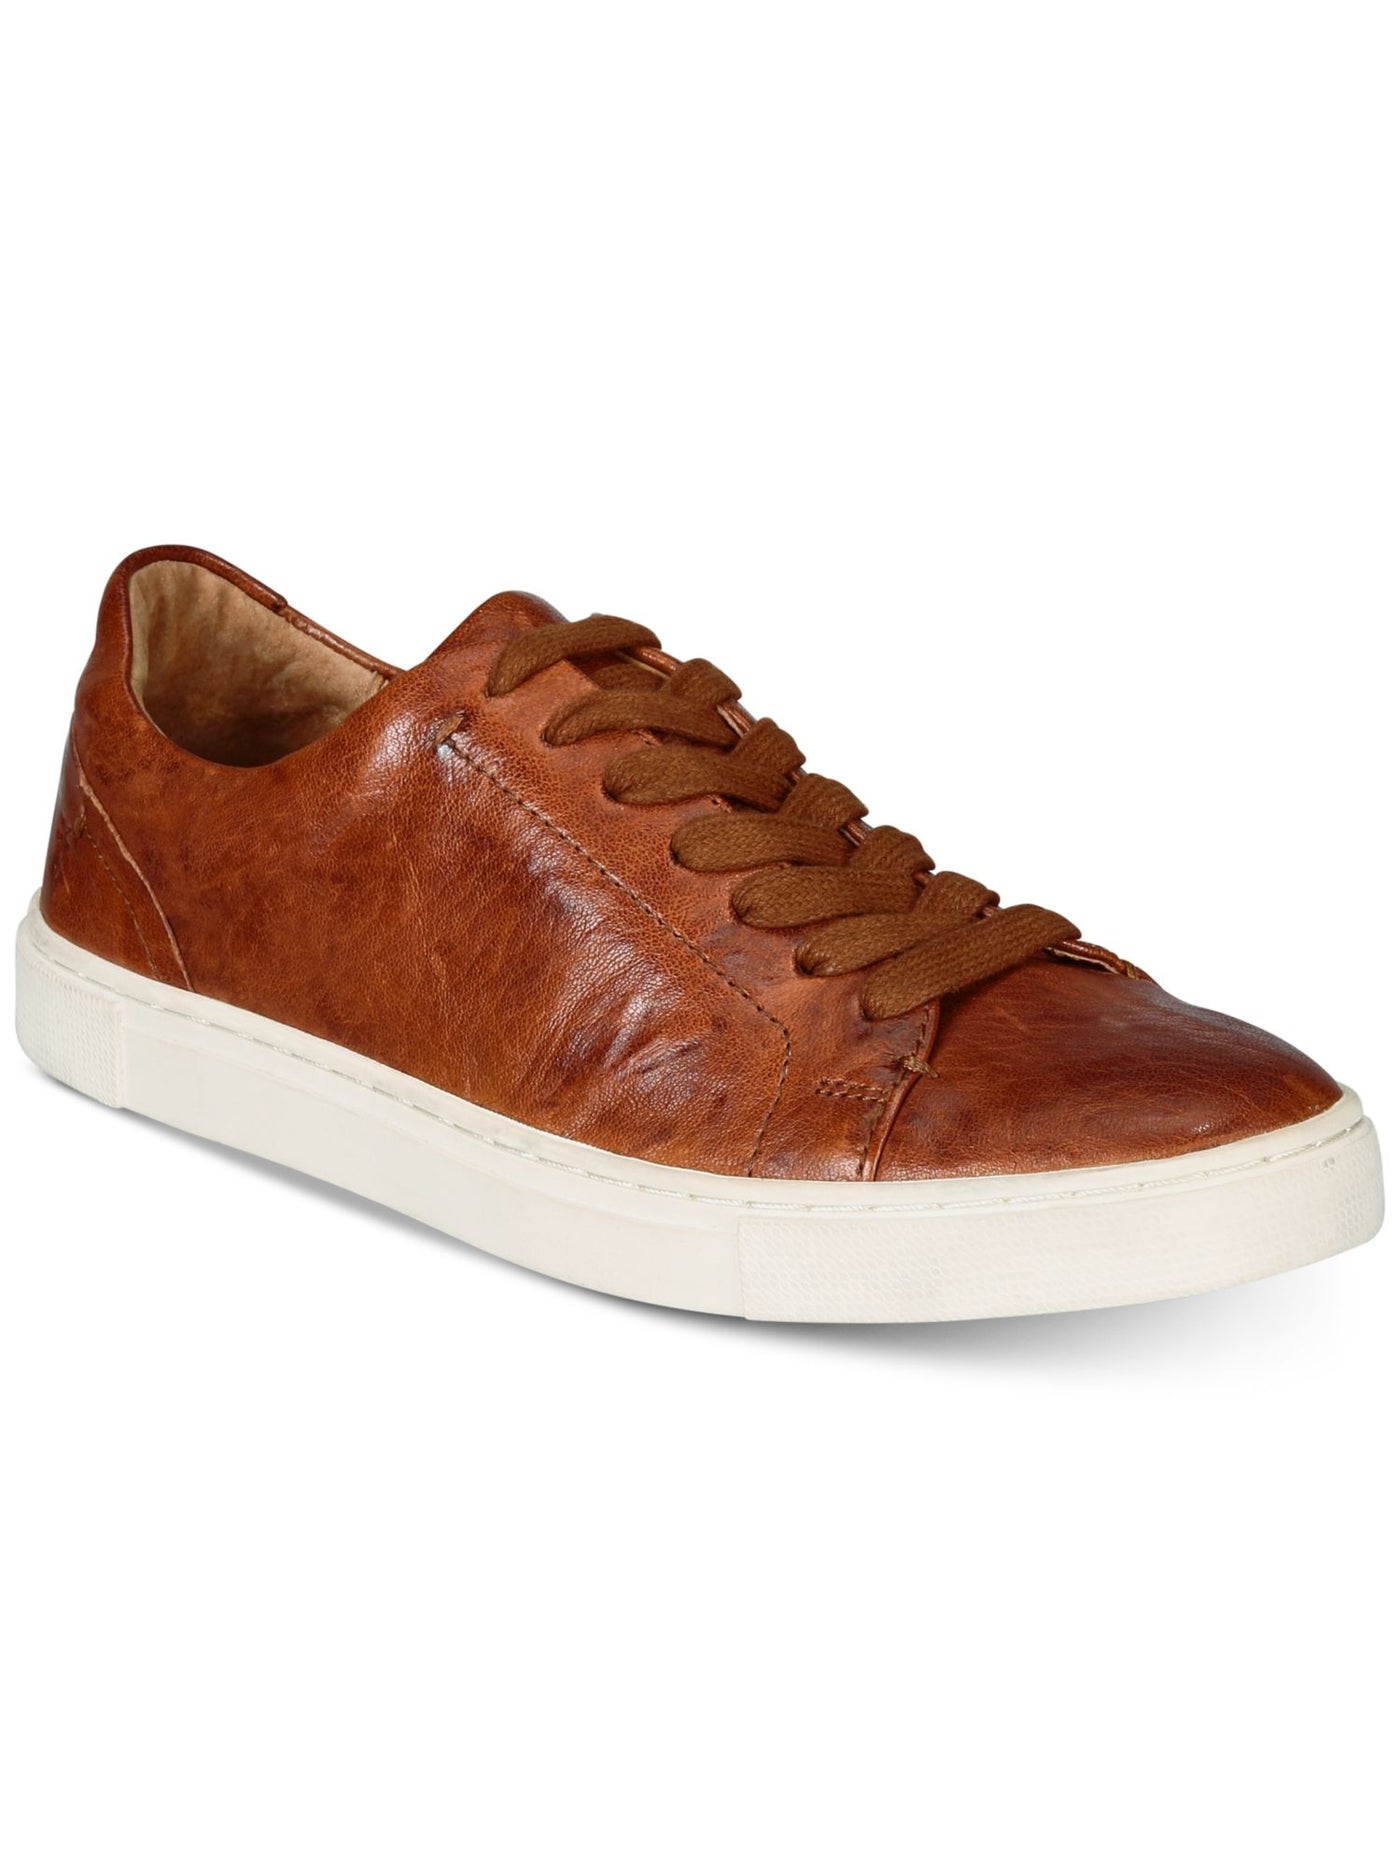 FRYE Womens Cognac Brown Padded Ivy Round Toe Lace-Up Athletic Sneakers Shoes 6 M